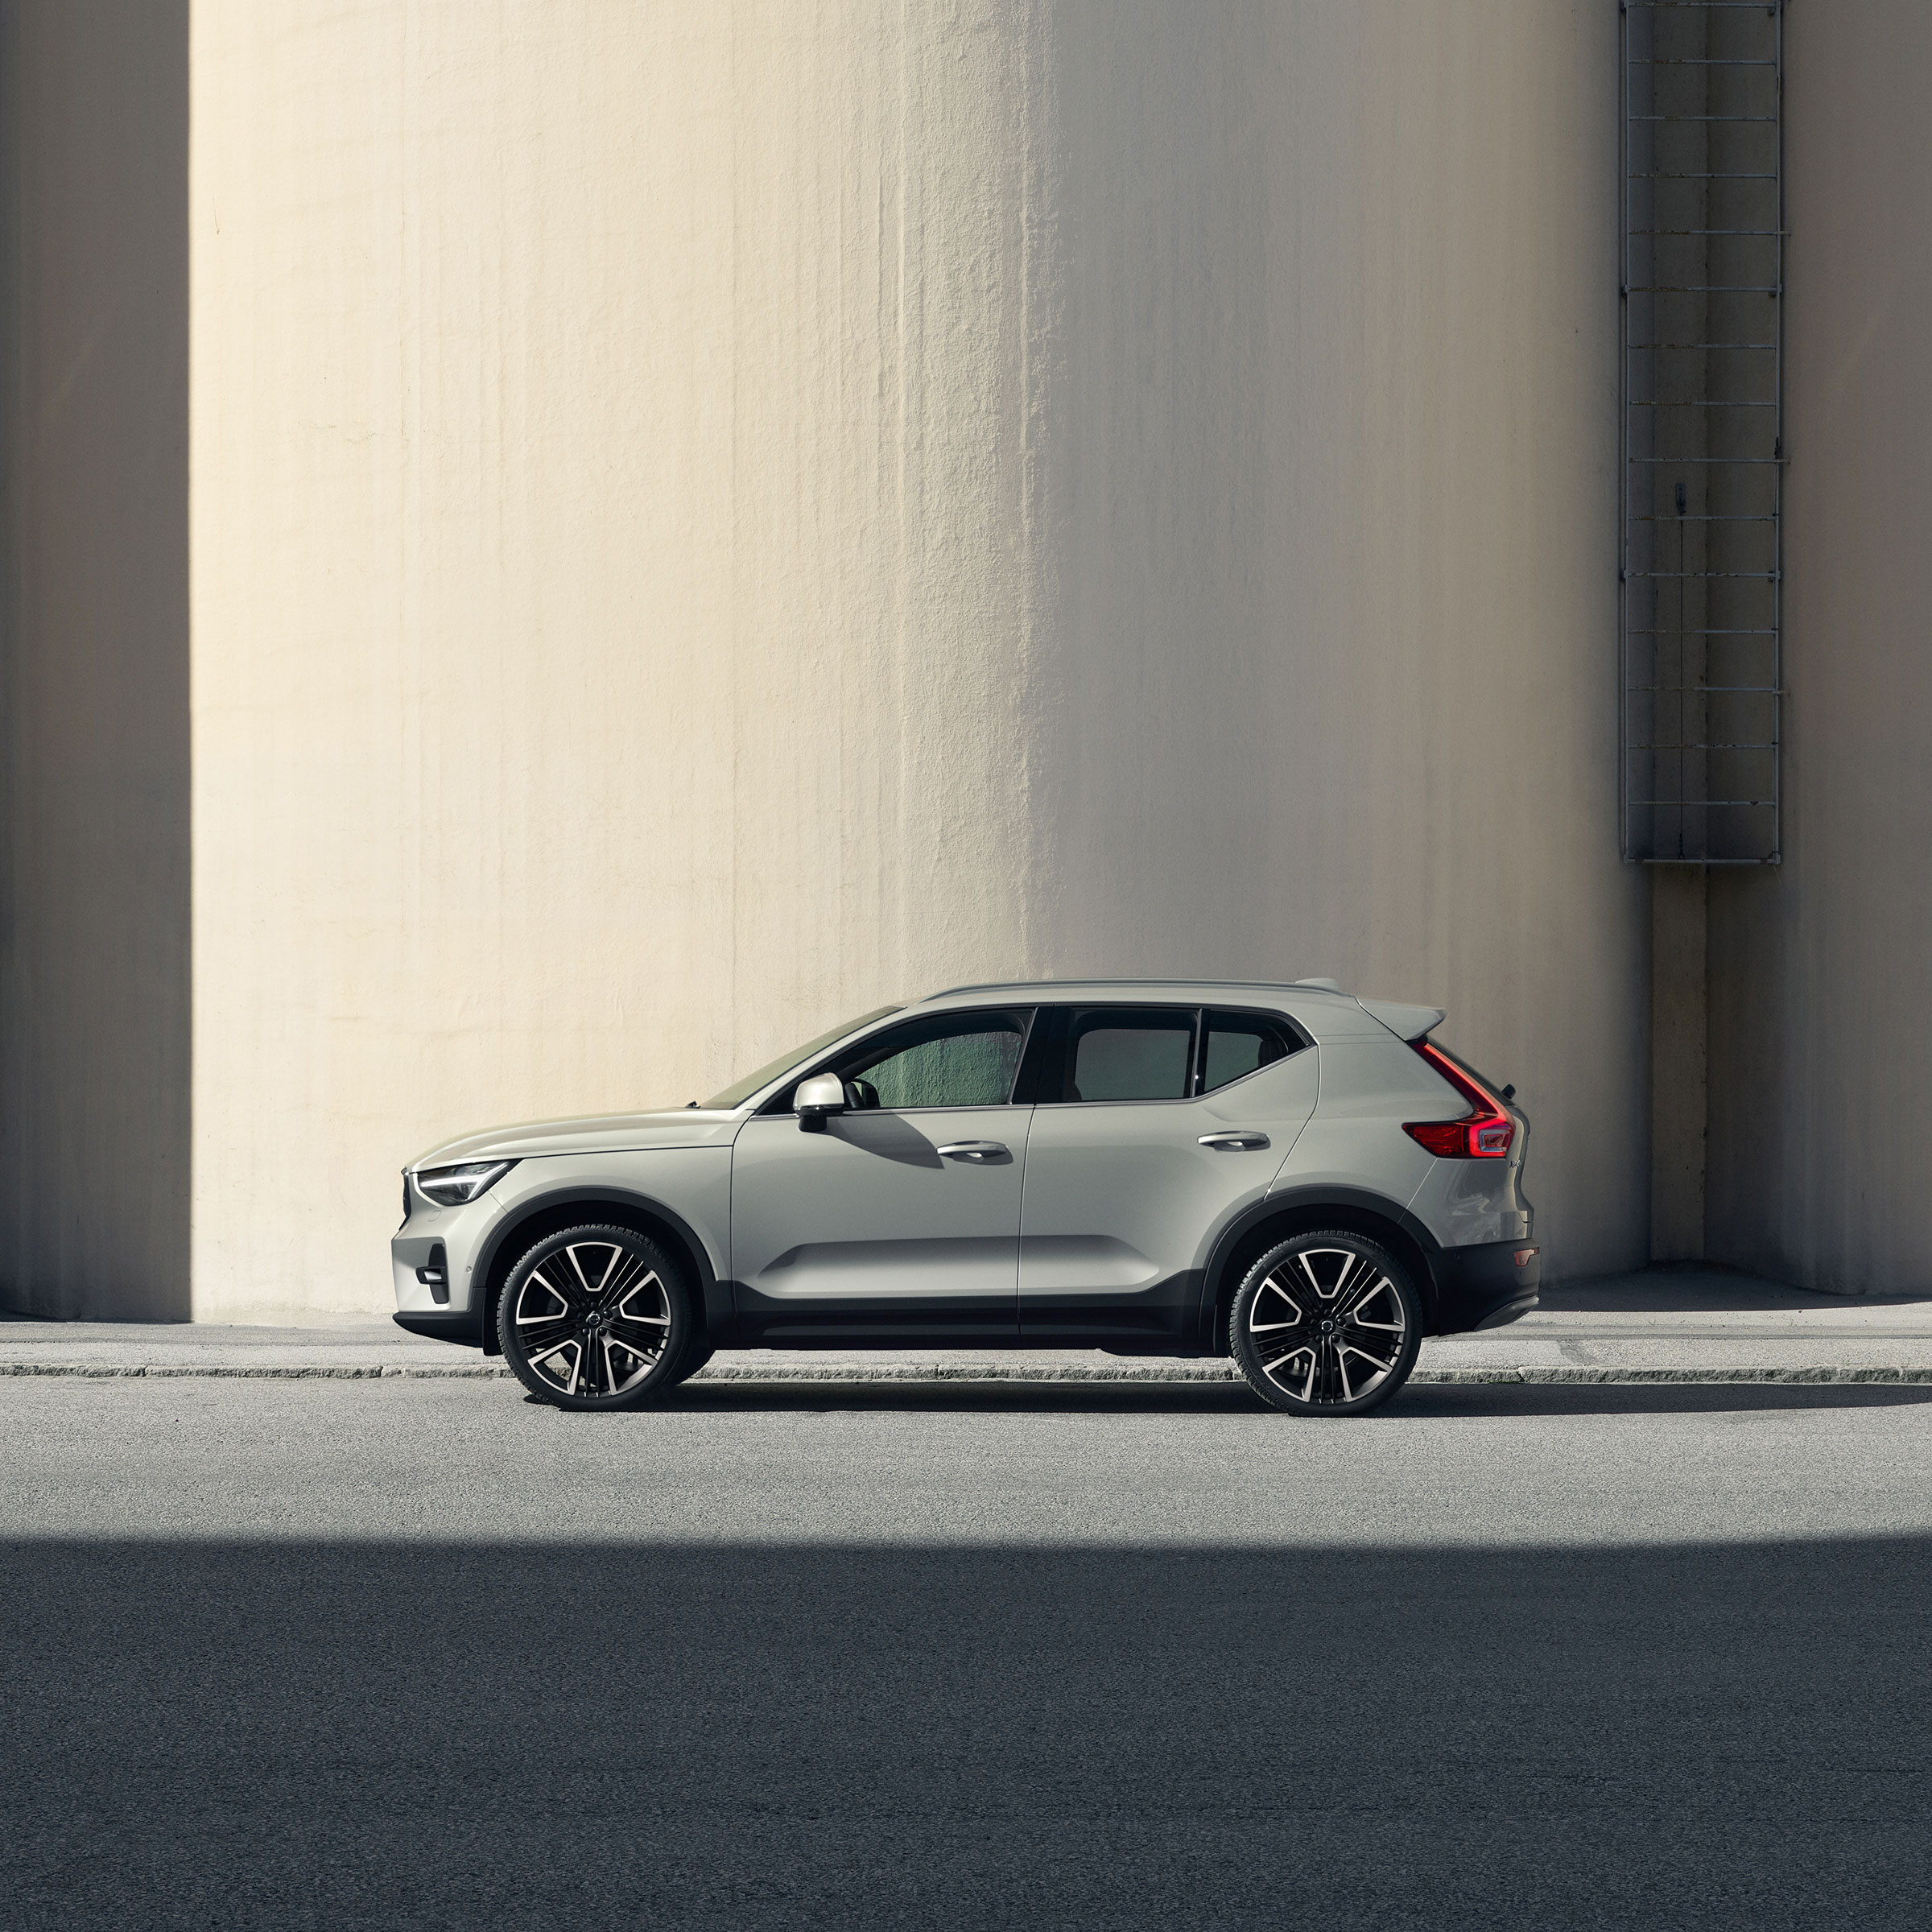 The side profile of a Volvo XC40 mild hybrid SUV.